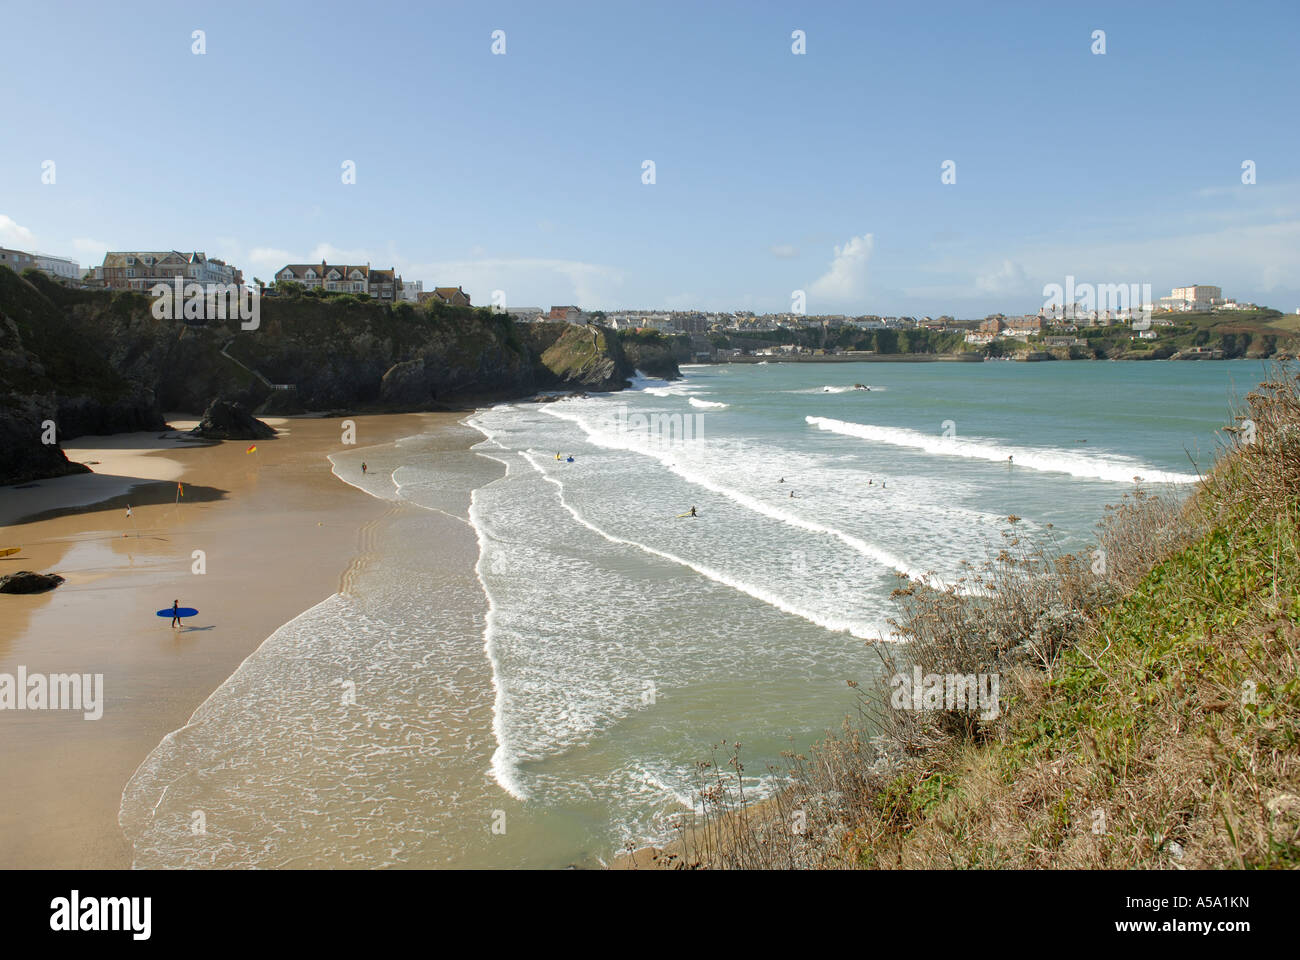 Newquay overlooks some of the best surfing beaches in the country. Stock Photo